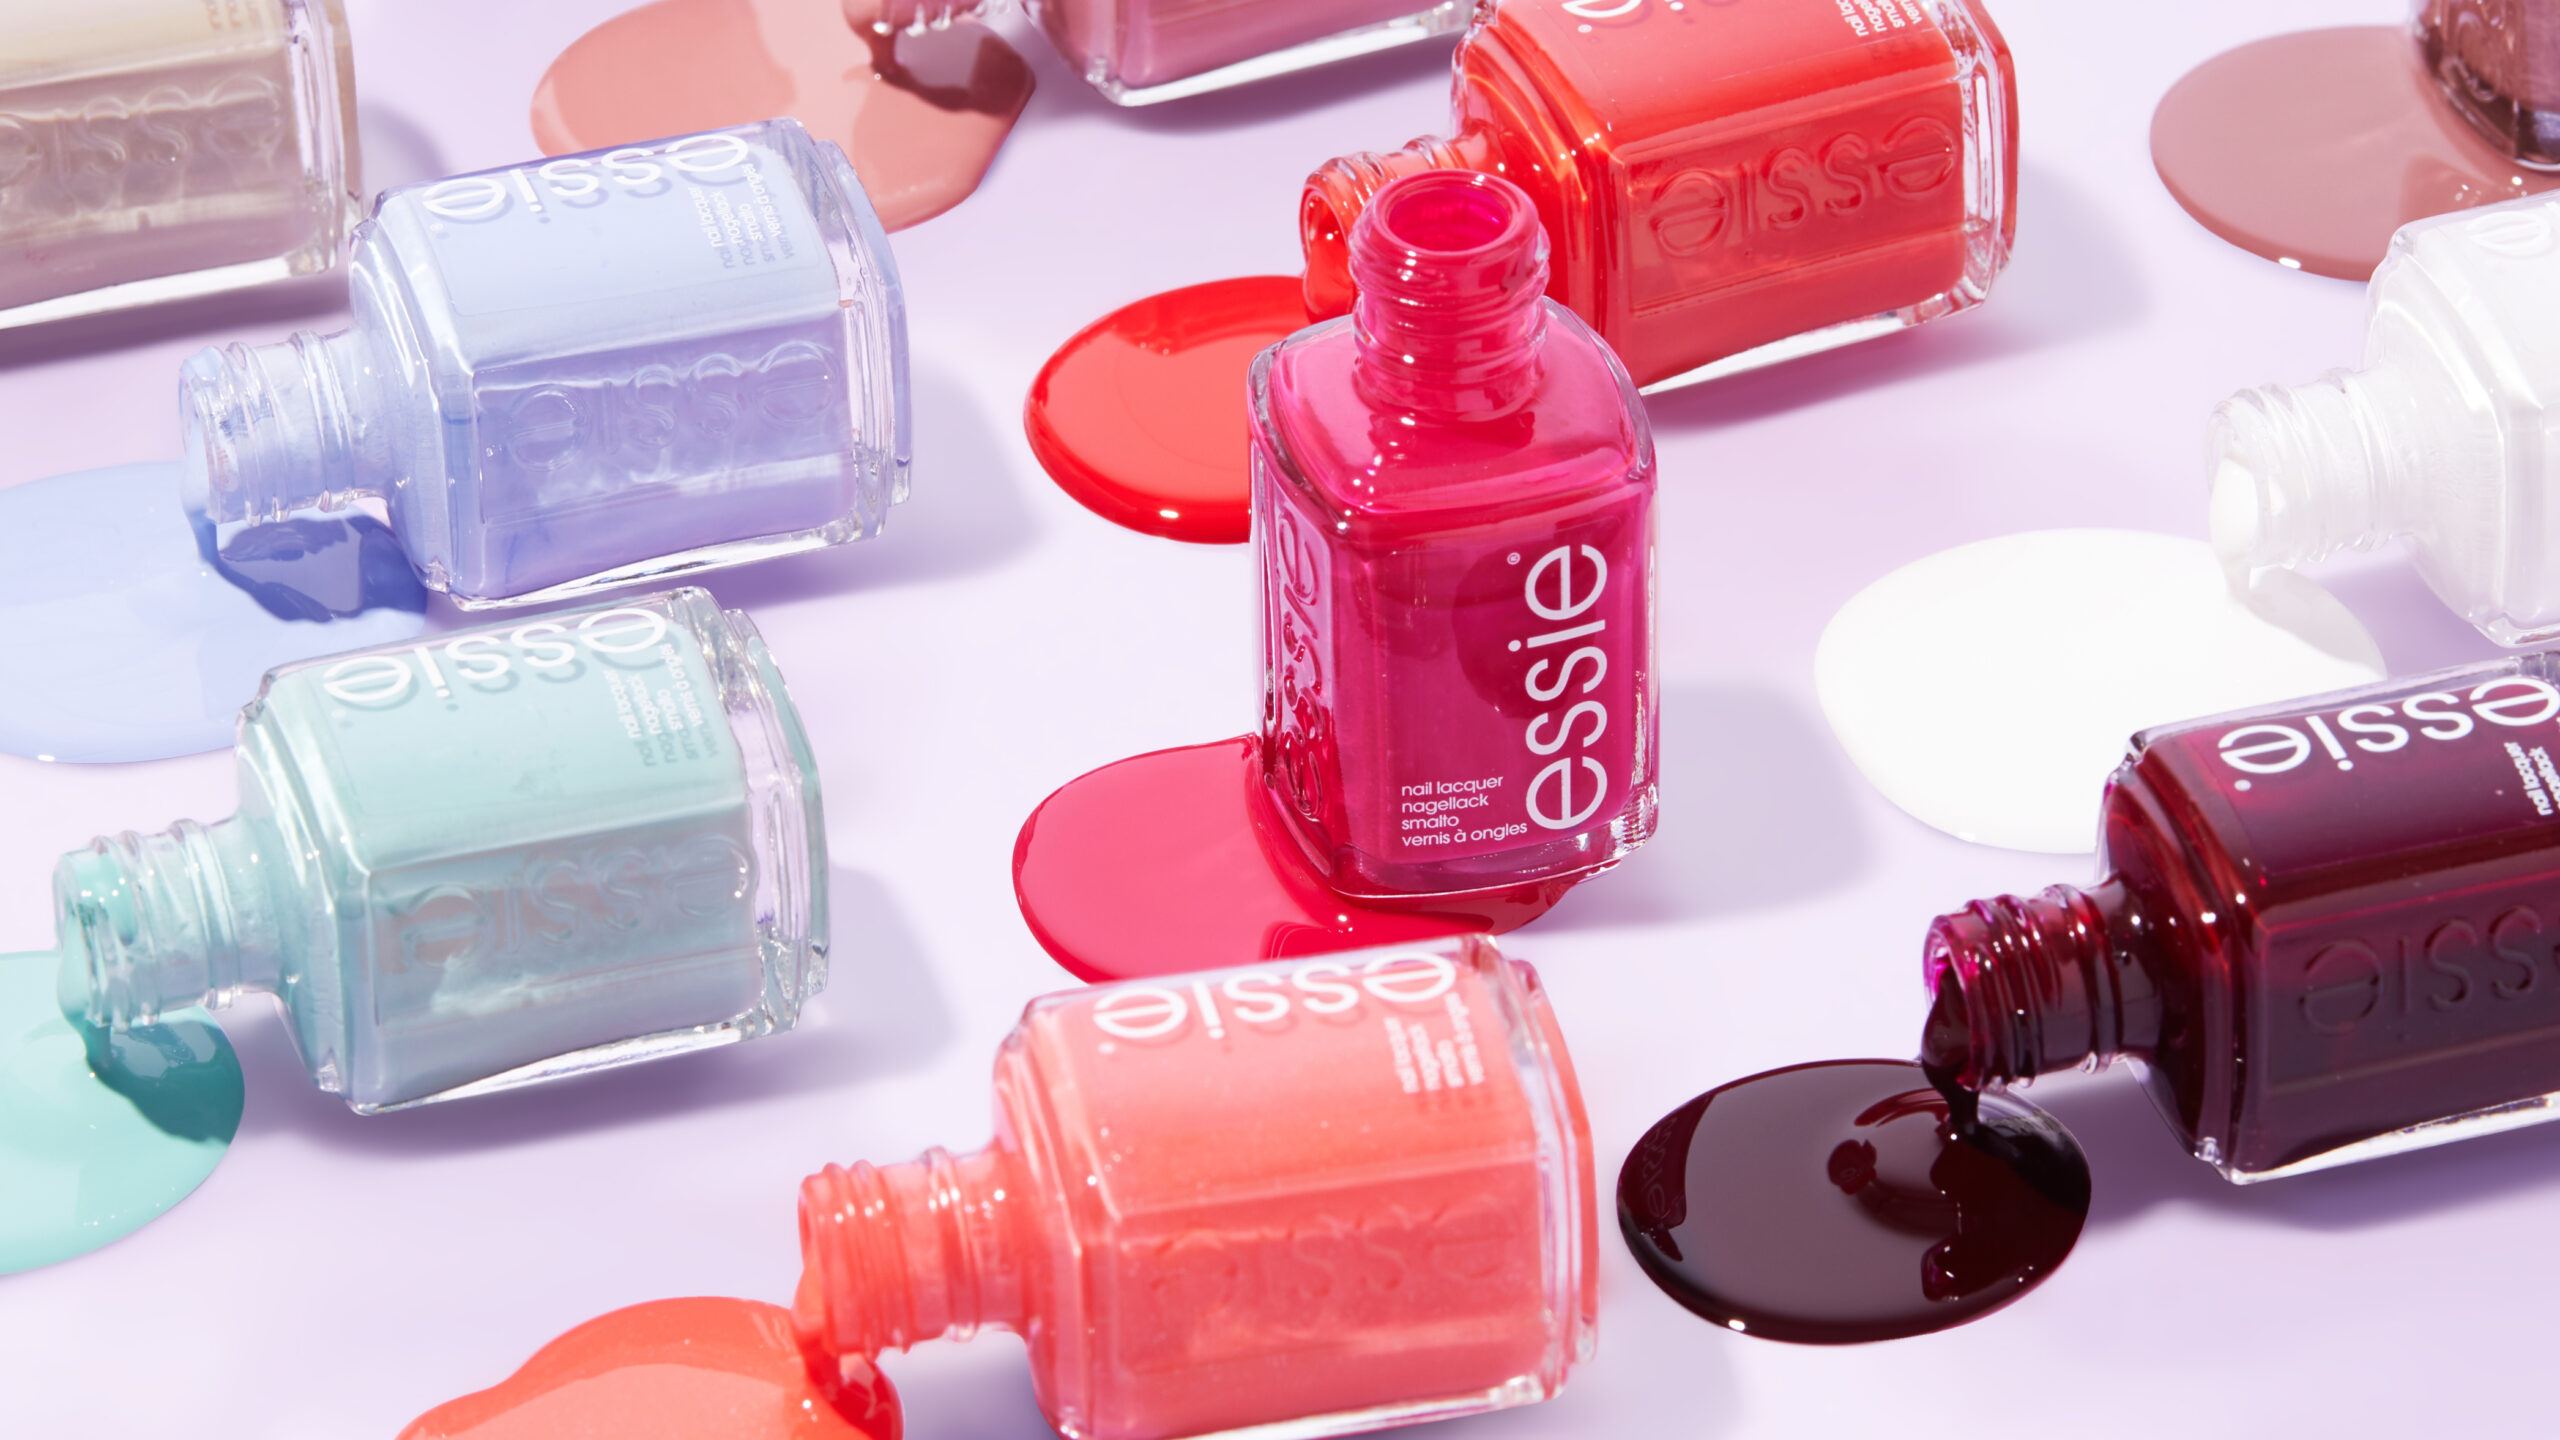 These Are Our Favourite Essie Nail Polish Shades - Beauty Bay Edited